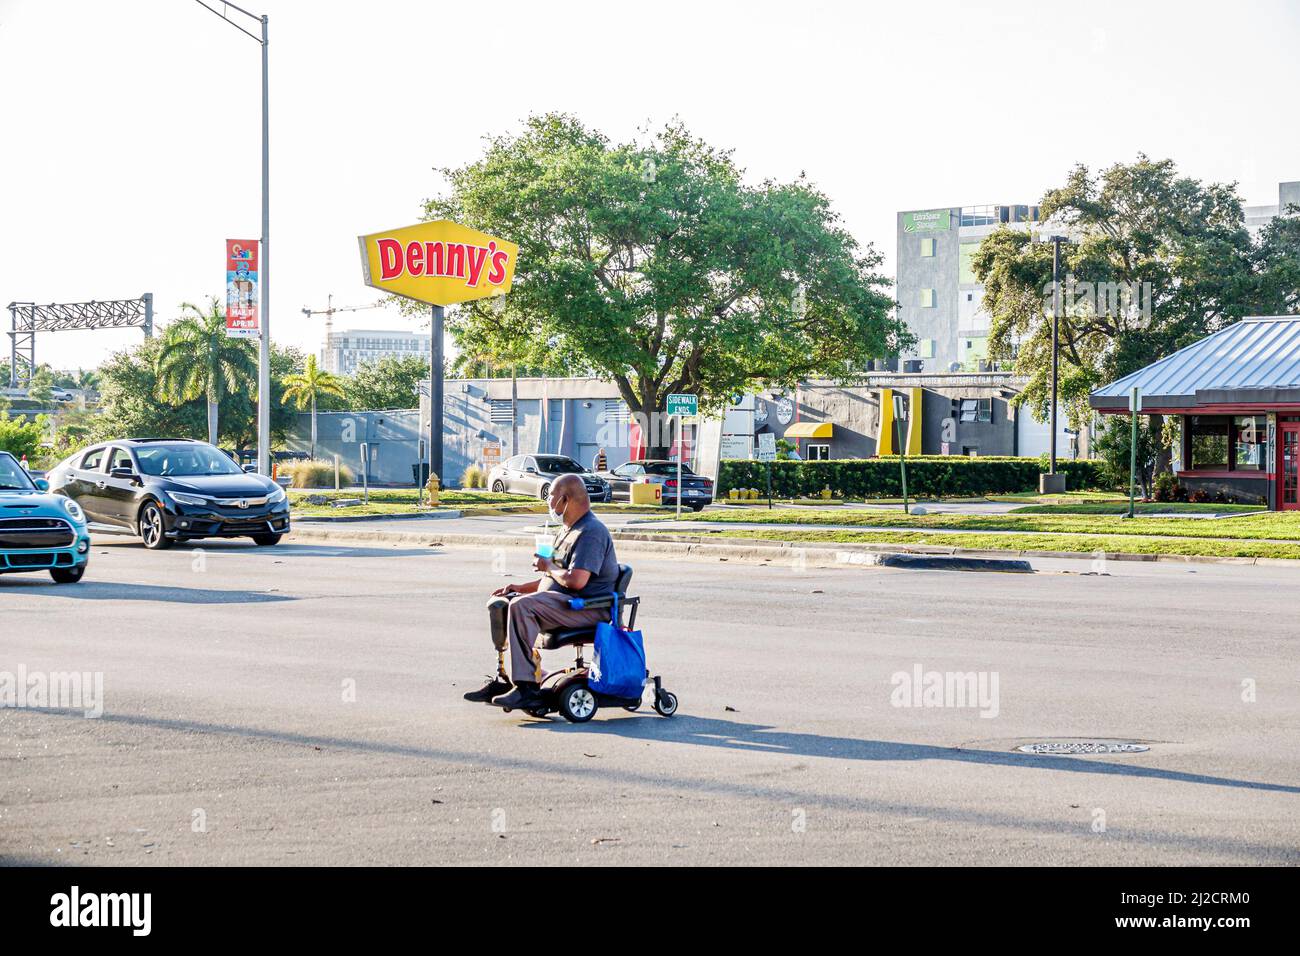 Miami Florida NW 36th Street Hispanic man crossing electric wheelchair disabled oncoming traffic Stock Photo